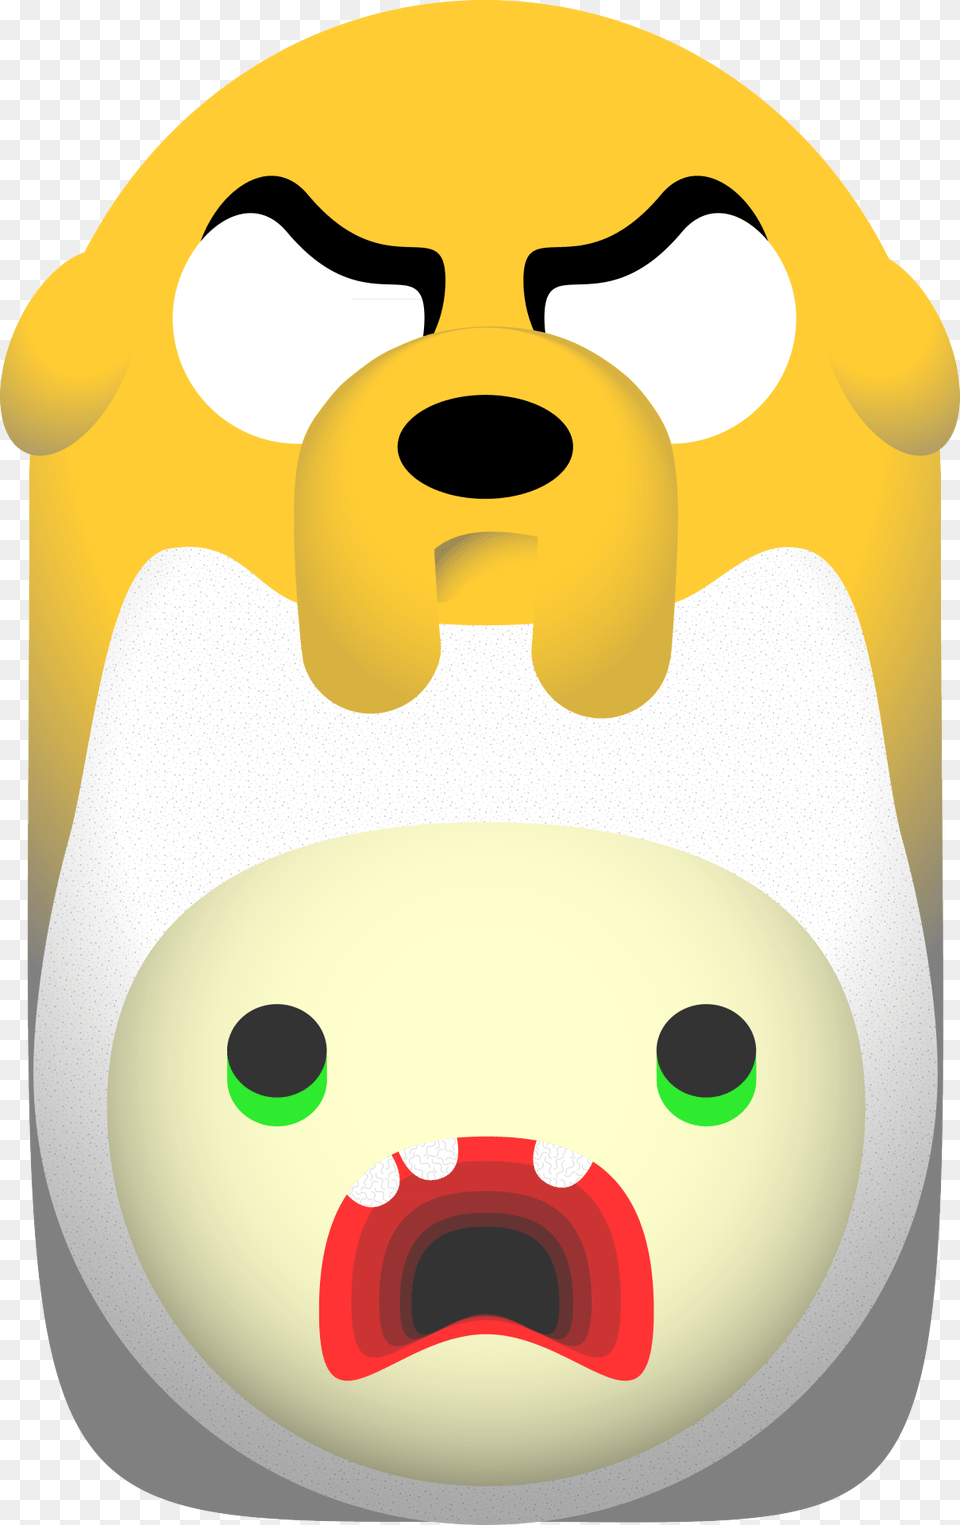 Adventure Time 2 Of 2 Finn And Jake Vector Graphic Cartoon Png Image